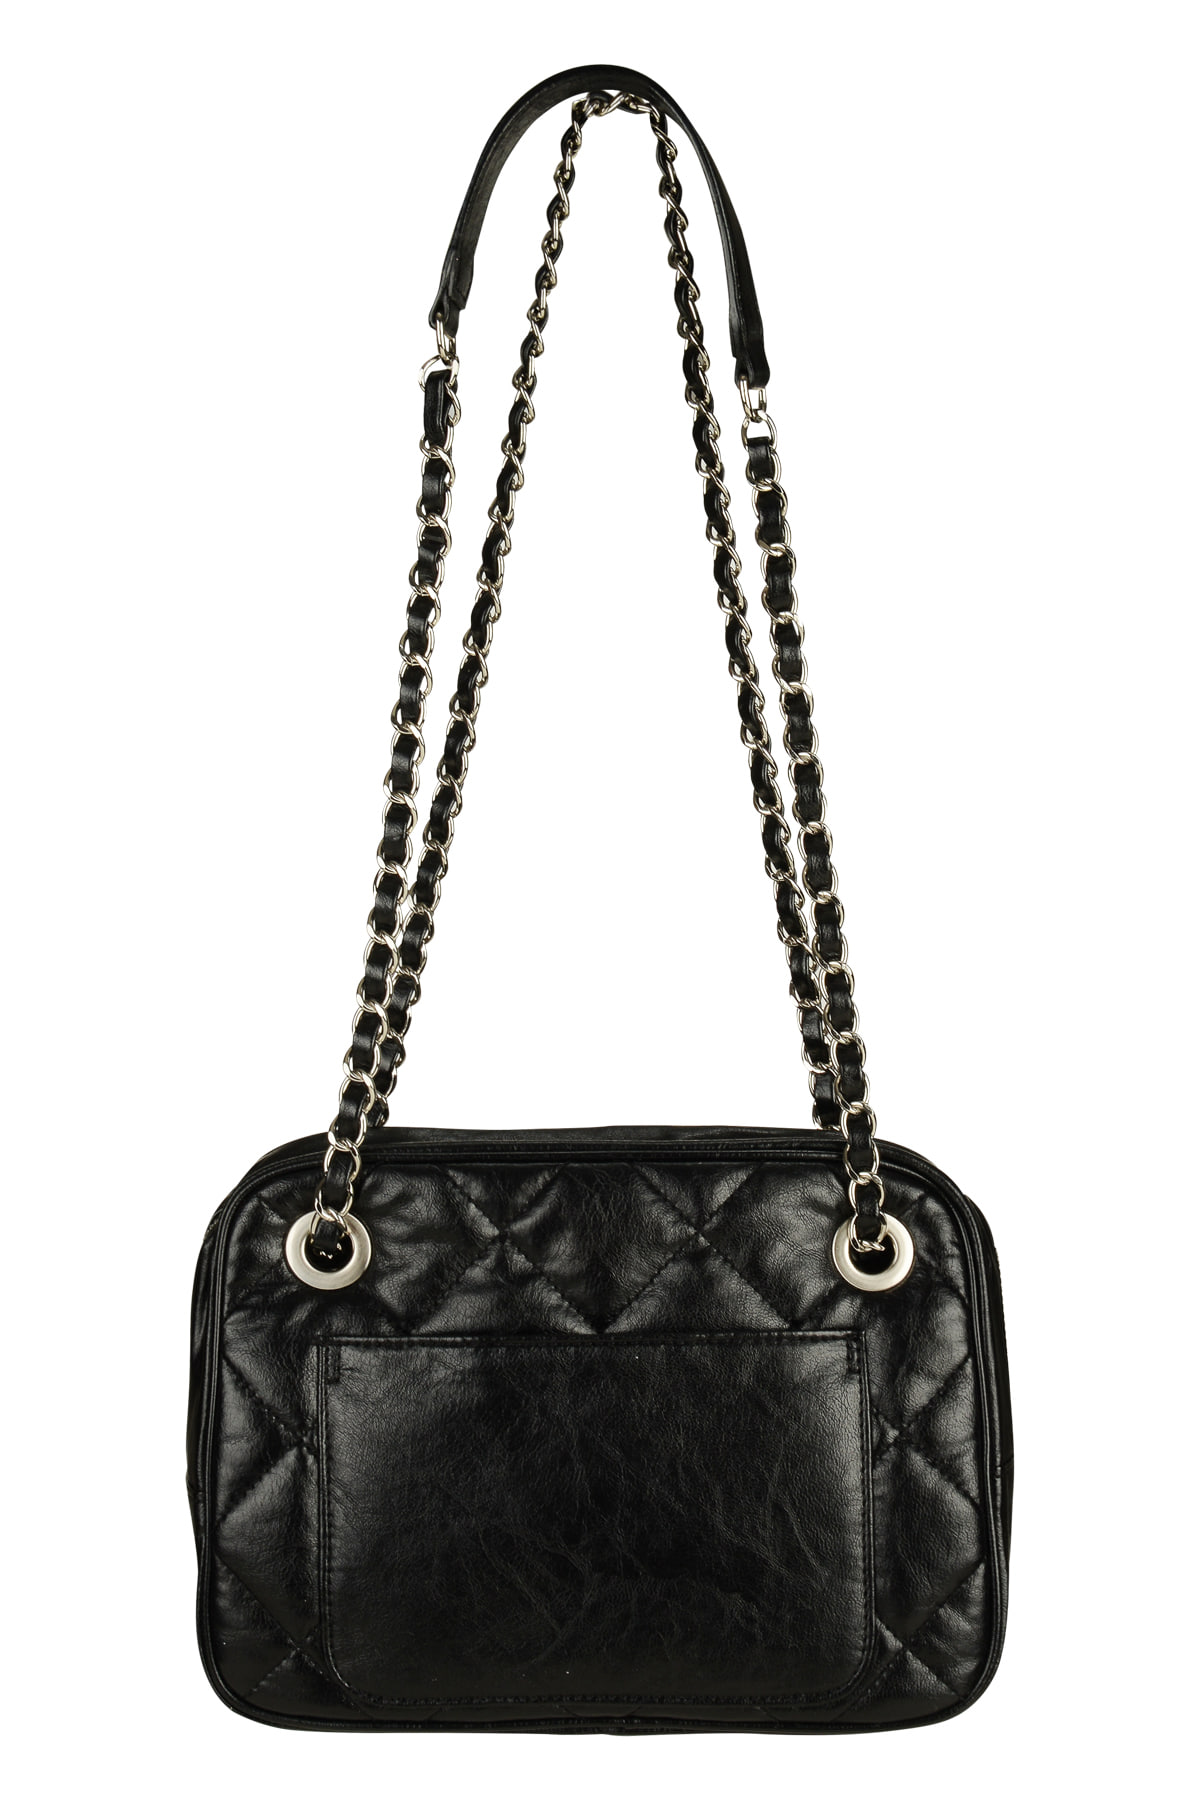 STUD MIDDLE QUILTING BAG IN BLACK